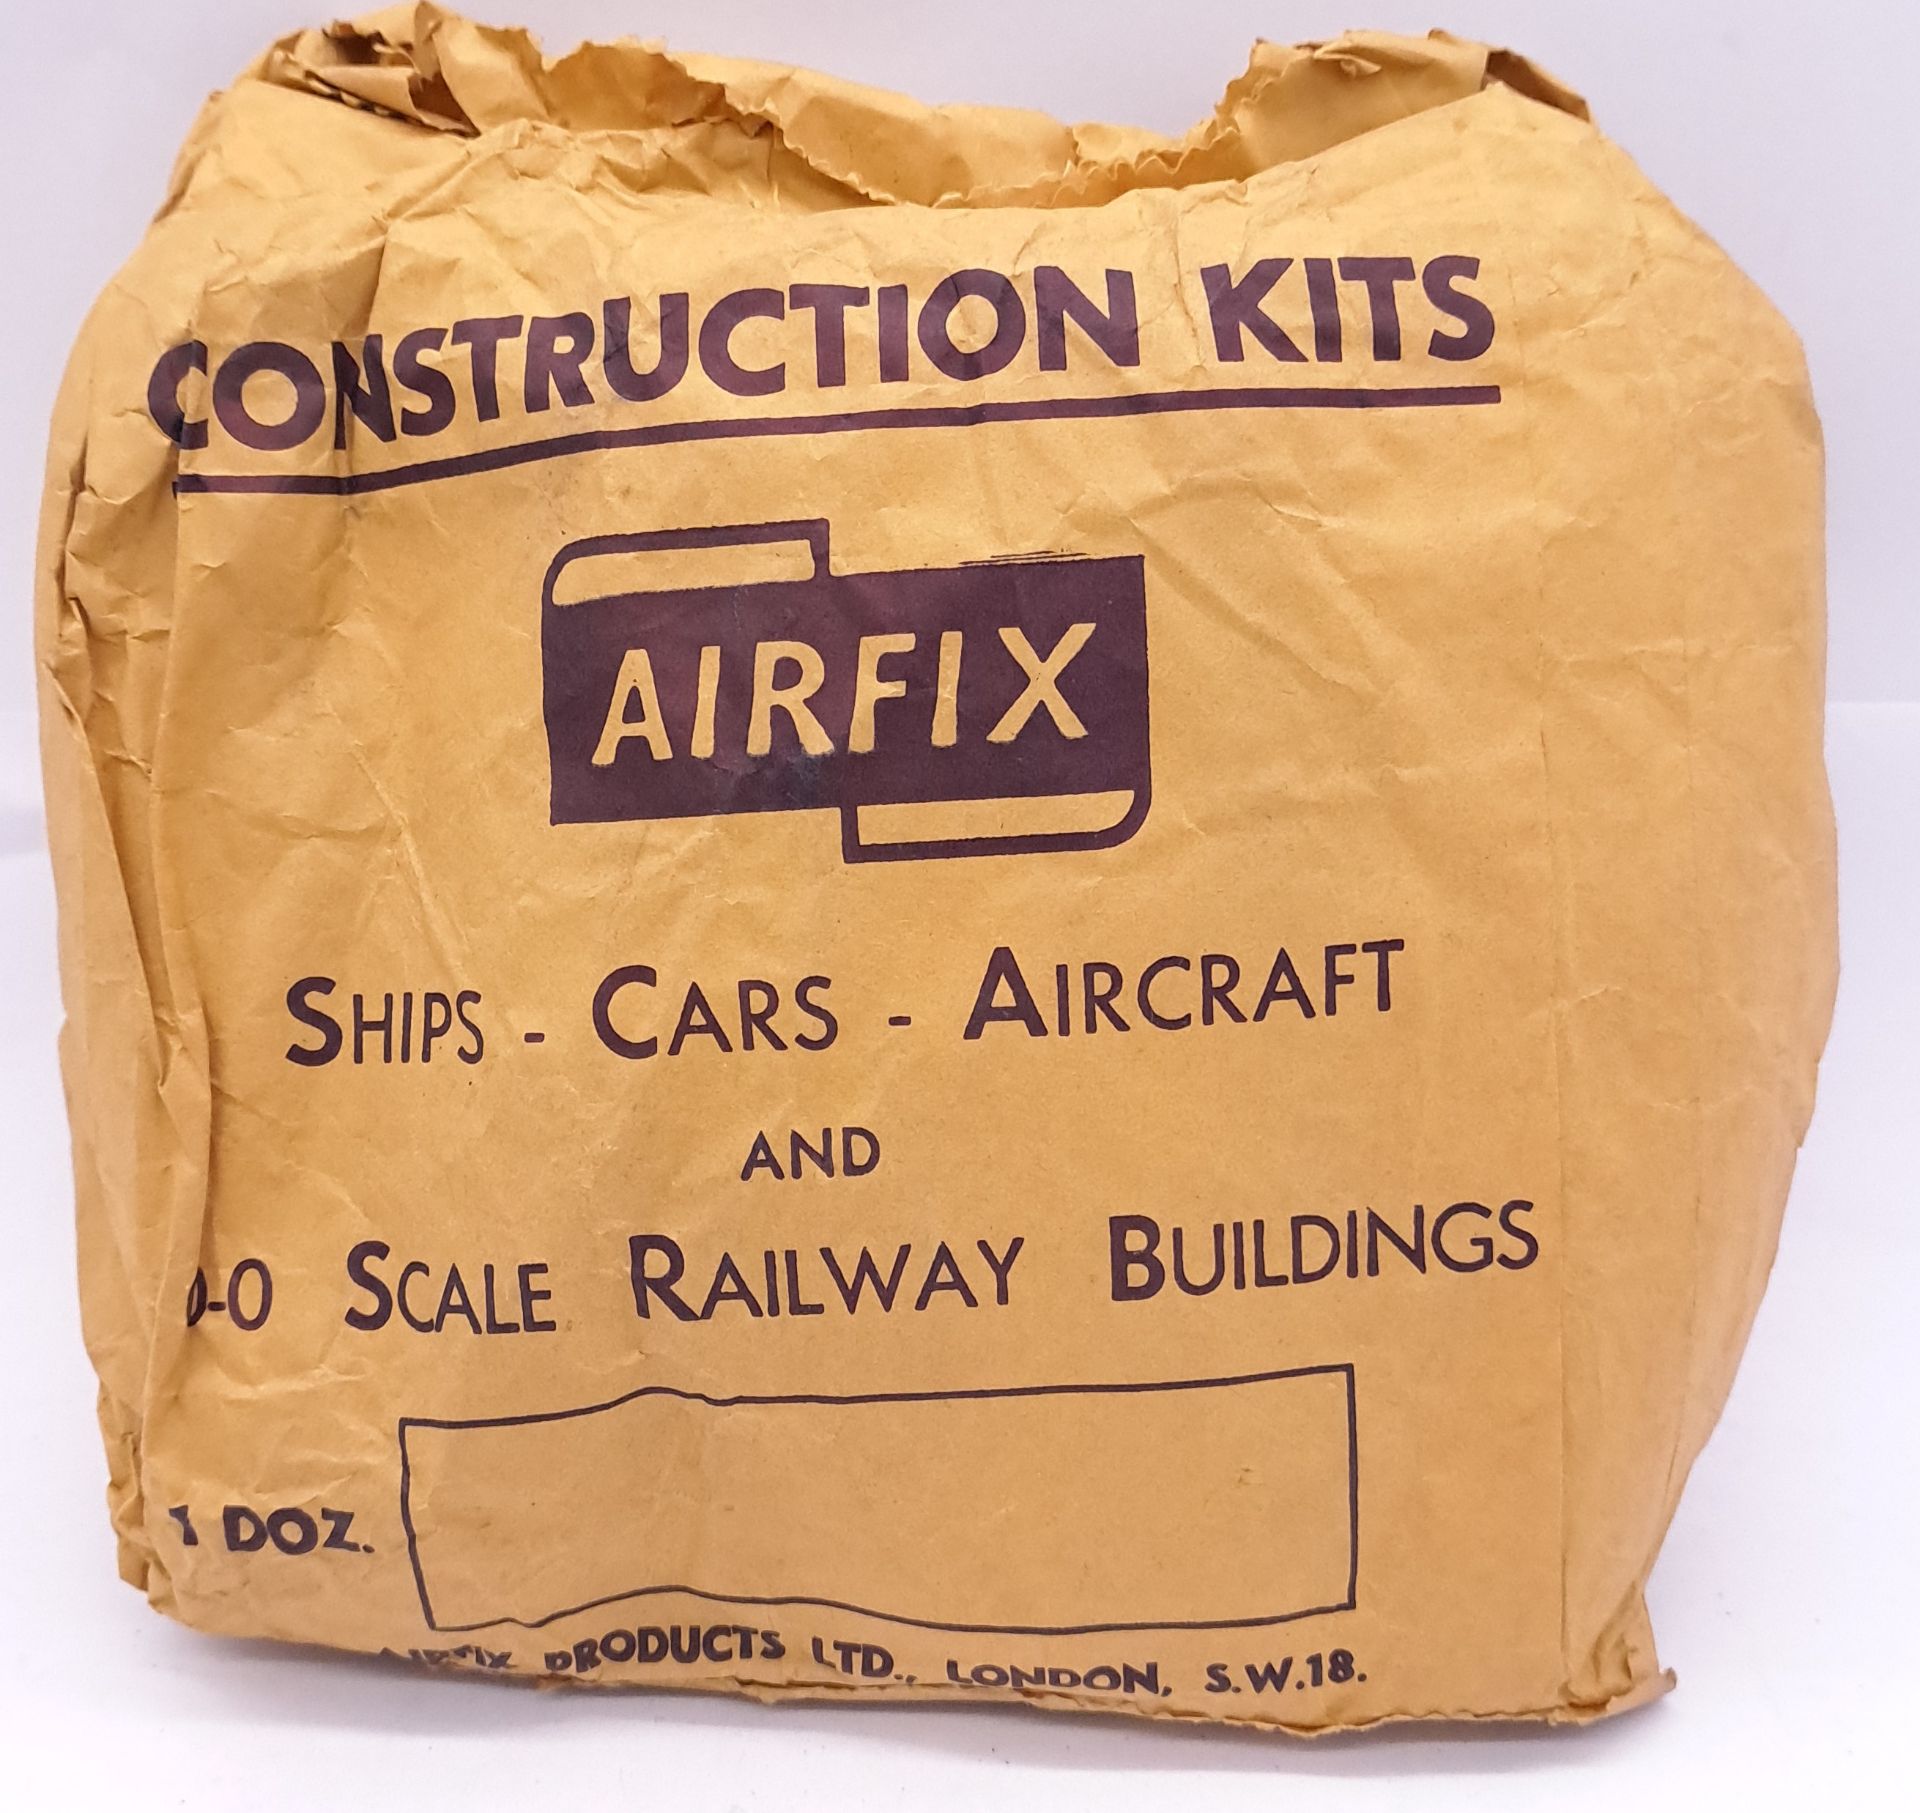 Airfix c1960’s ORIGINAL TRADE BAG complete with Bagged (possibly Type3) “Bristol Fighter” Kits - Image 4 of 8